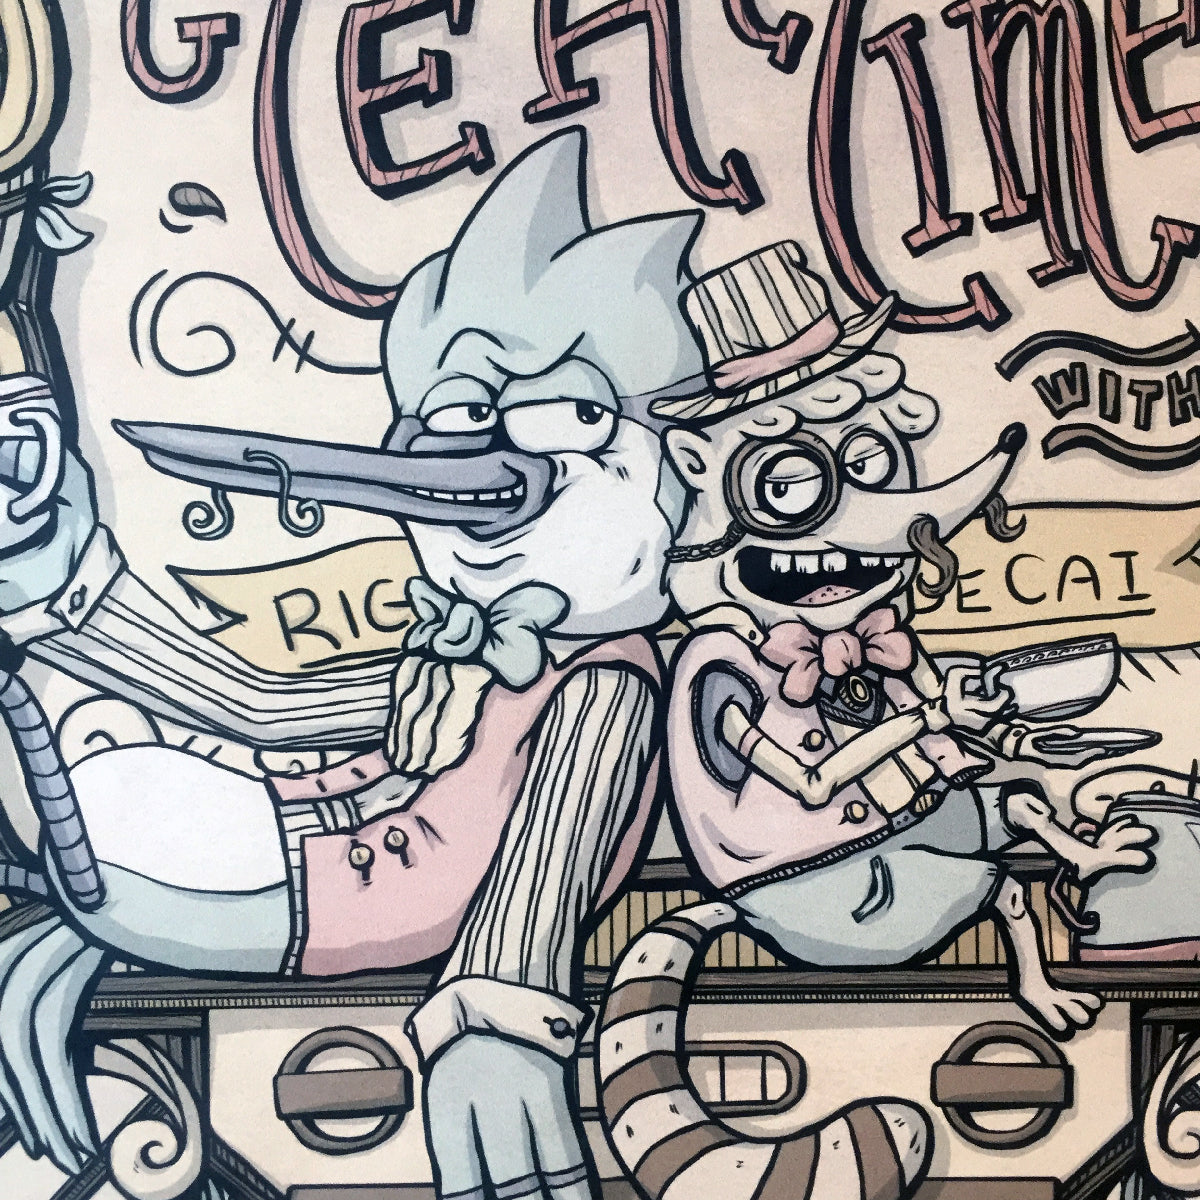 Regular Show Tea Time with Rigby and Mordecai Limited AP Edition 16" x 20" Poster Print by Gray Mako